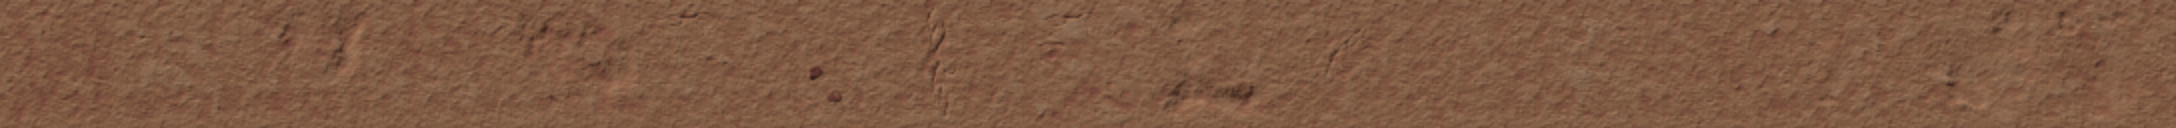 red-desert2_.png